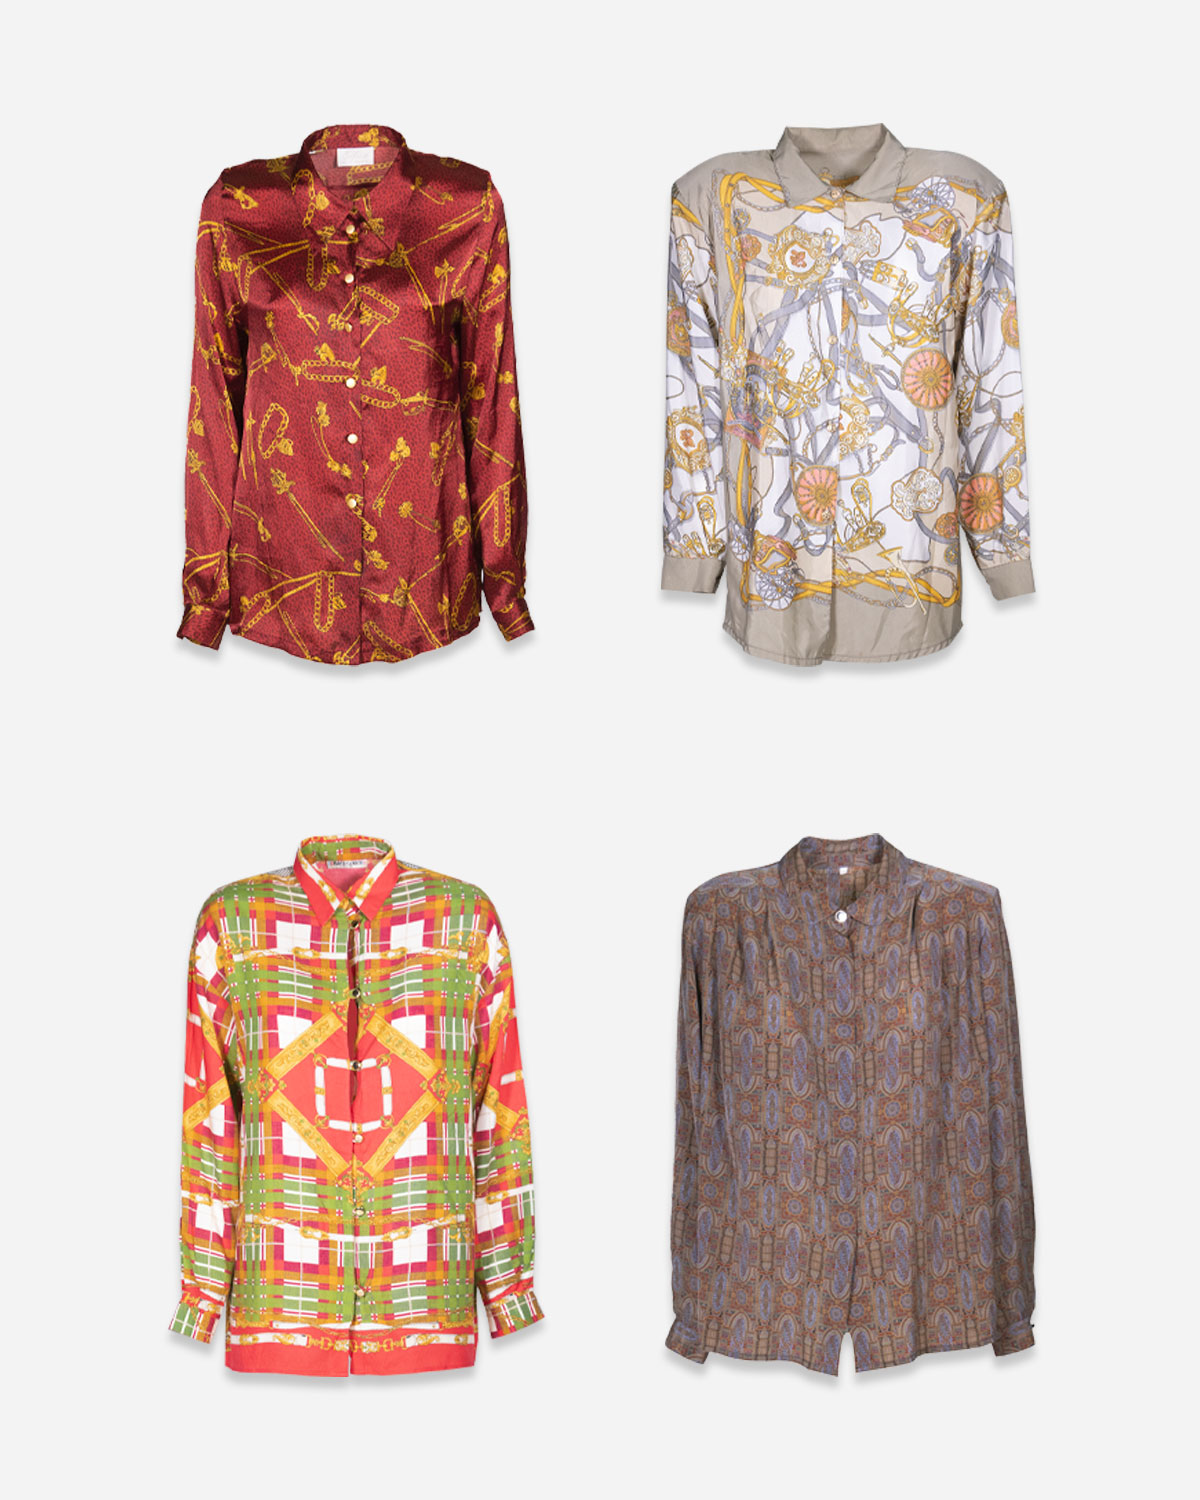 Women's baroque patterned shirts: 4 pieces